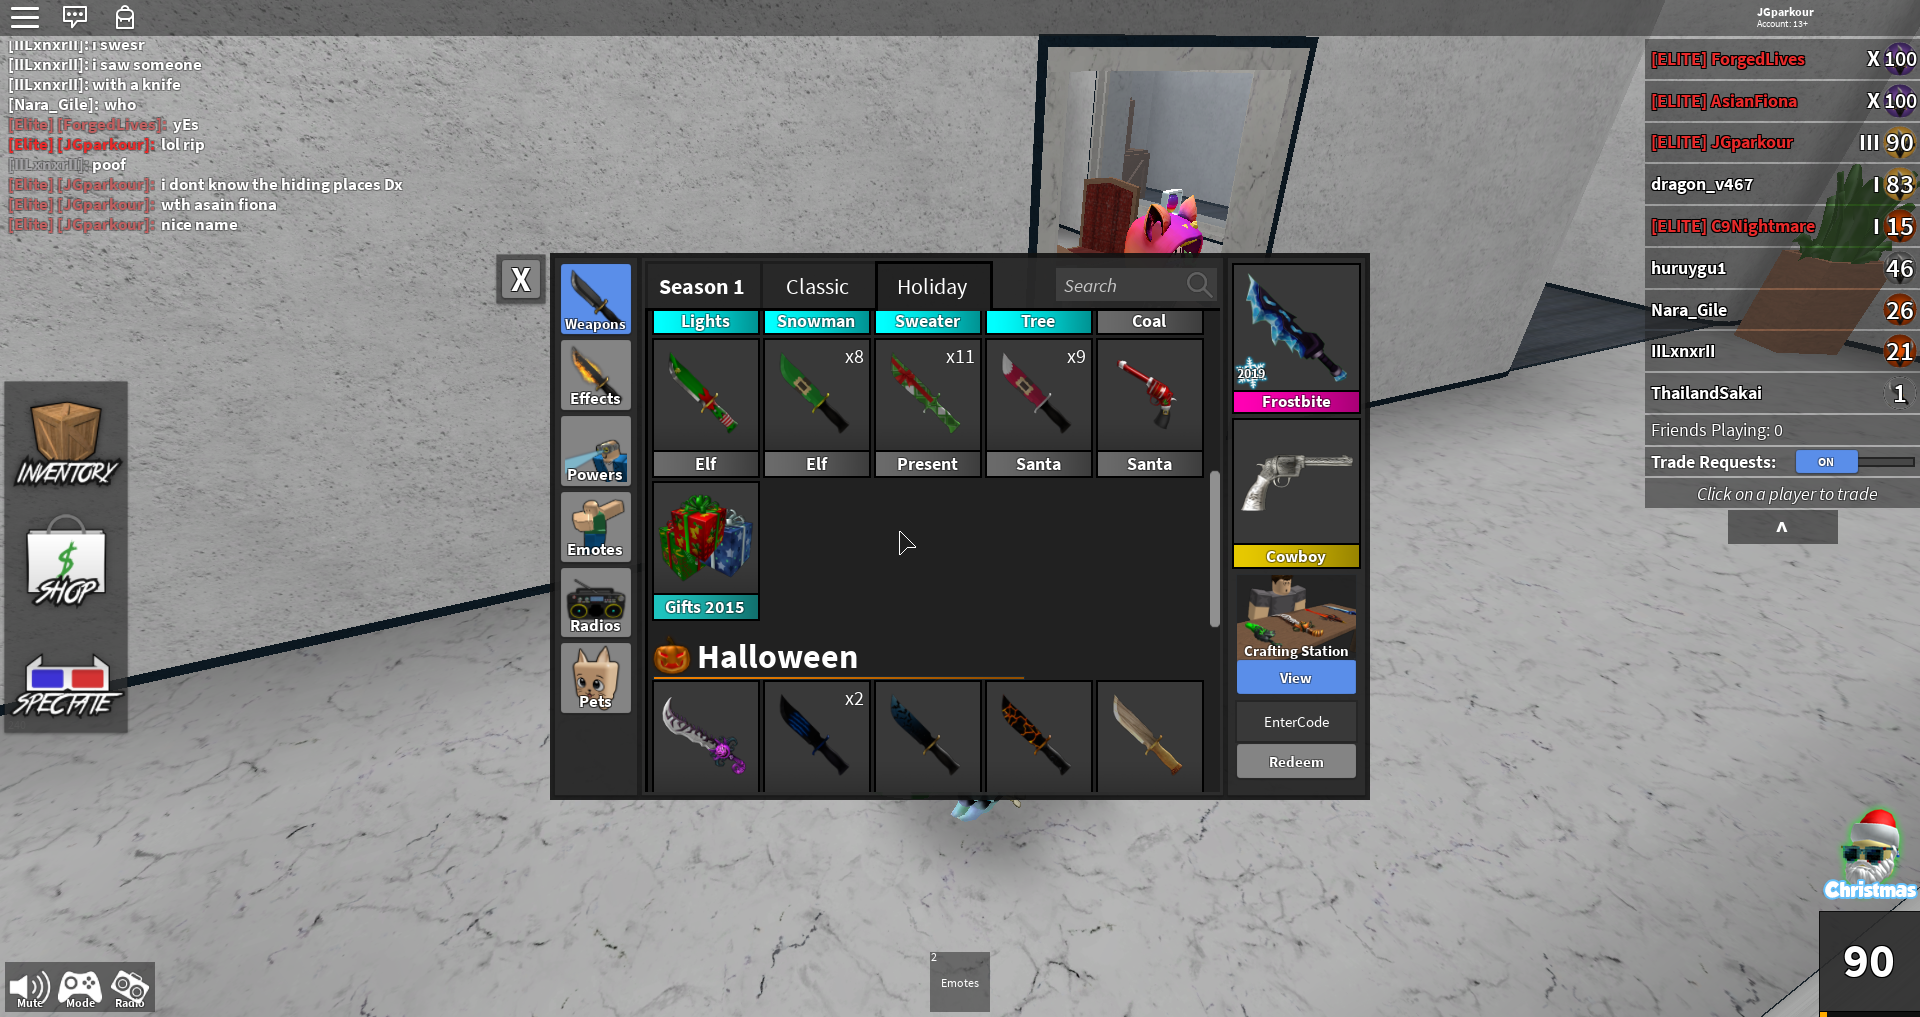 Trading My Mm2 Items For Adopt Me Items Fandom - roblox accounts for sale with mm2 stuff